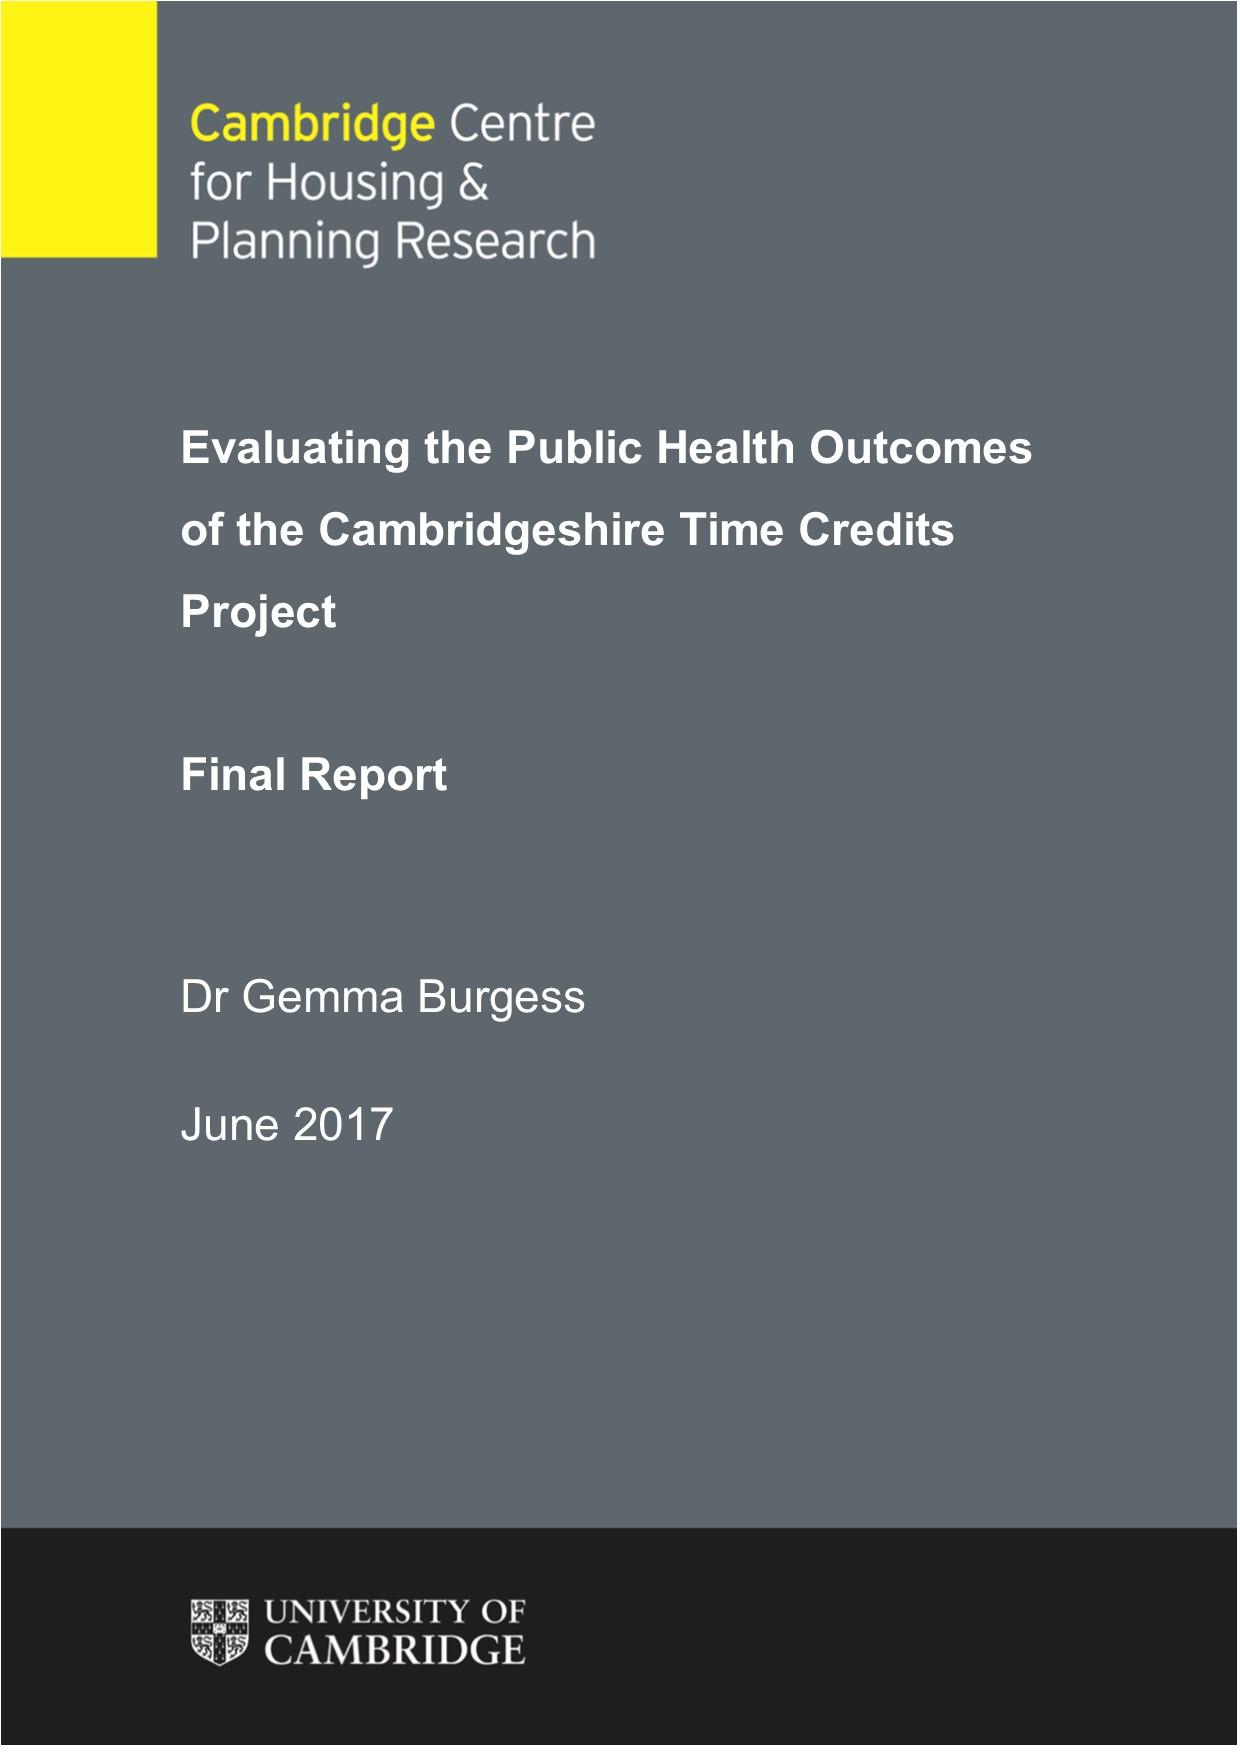 Time Credits: CCHPR's final report is published